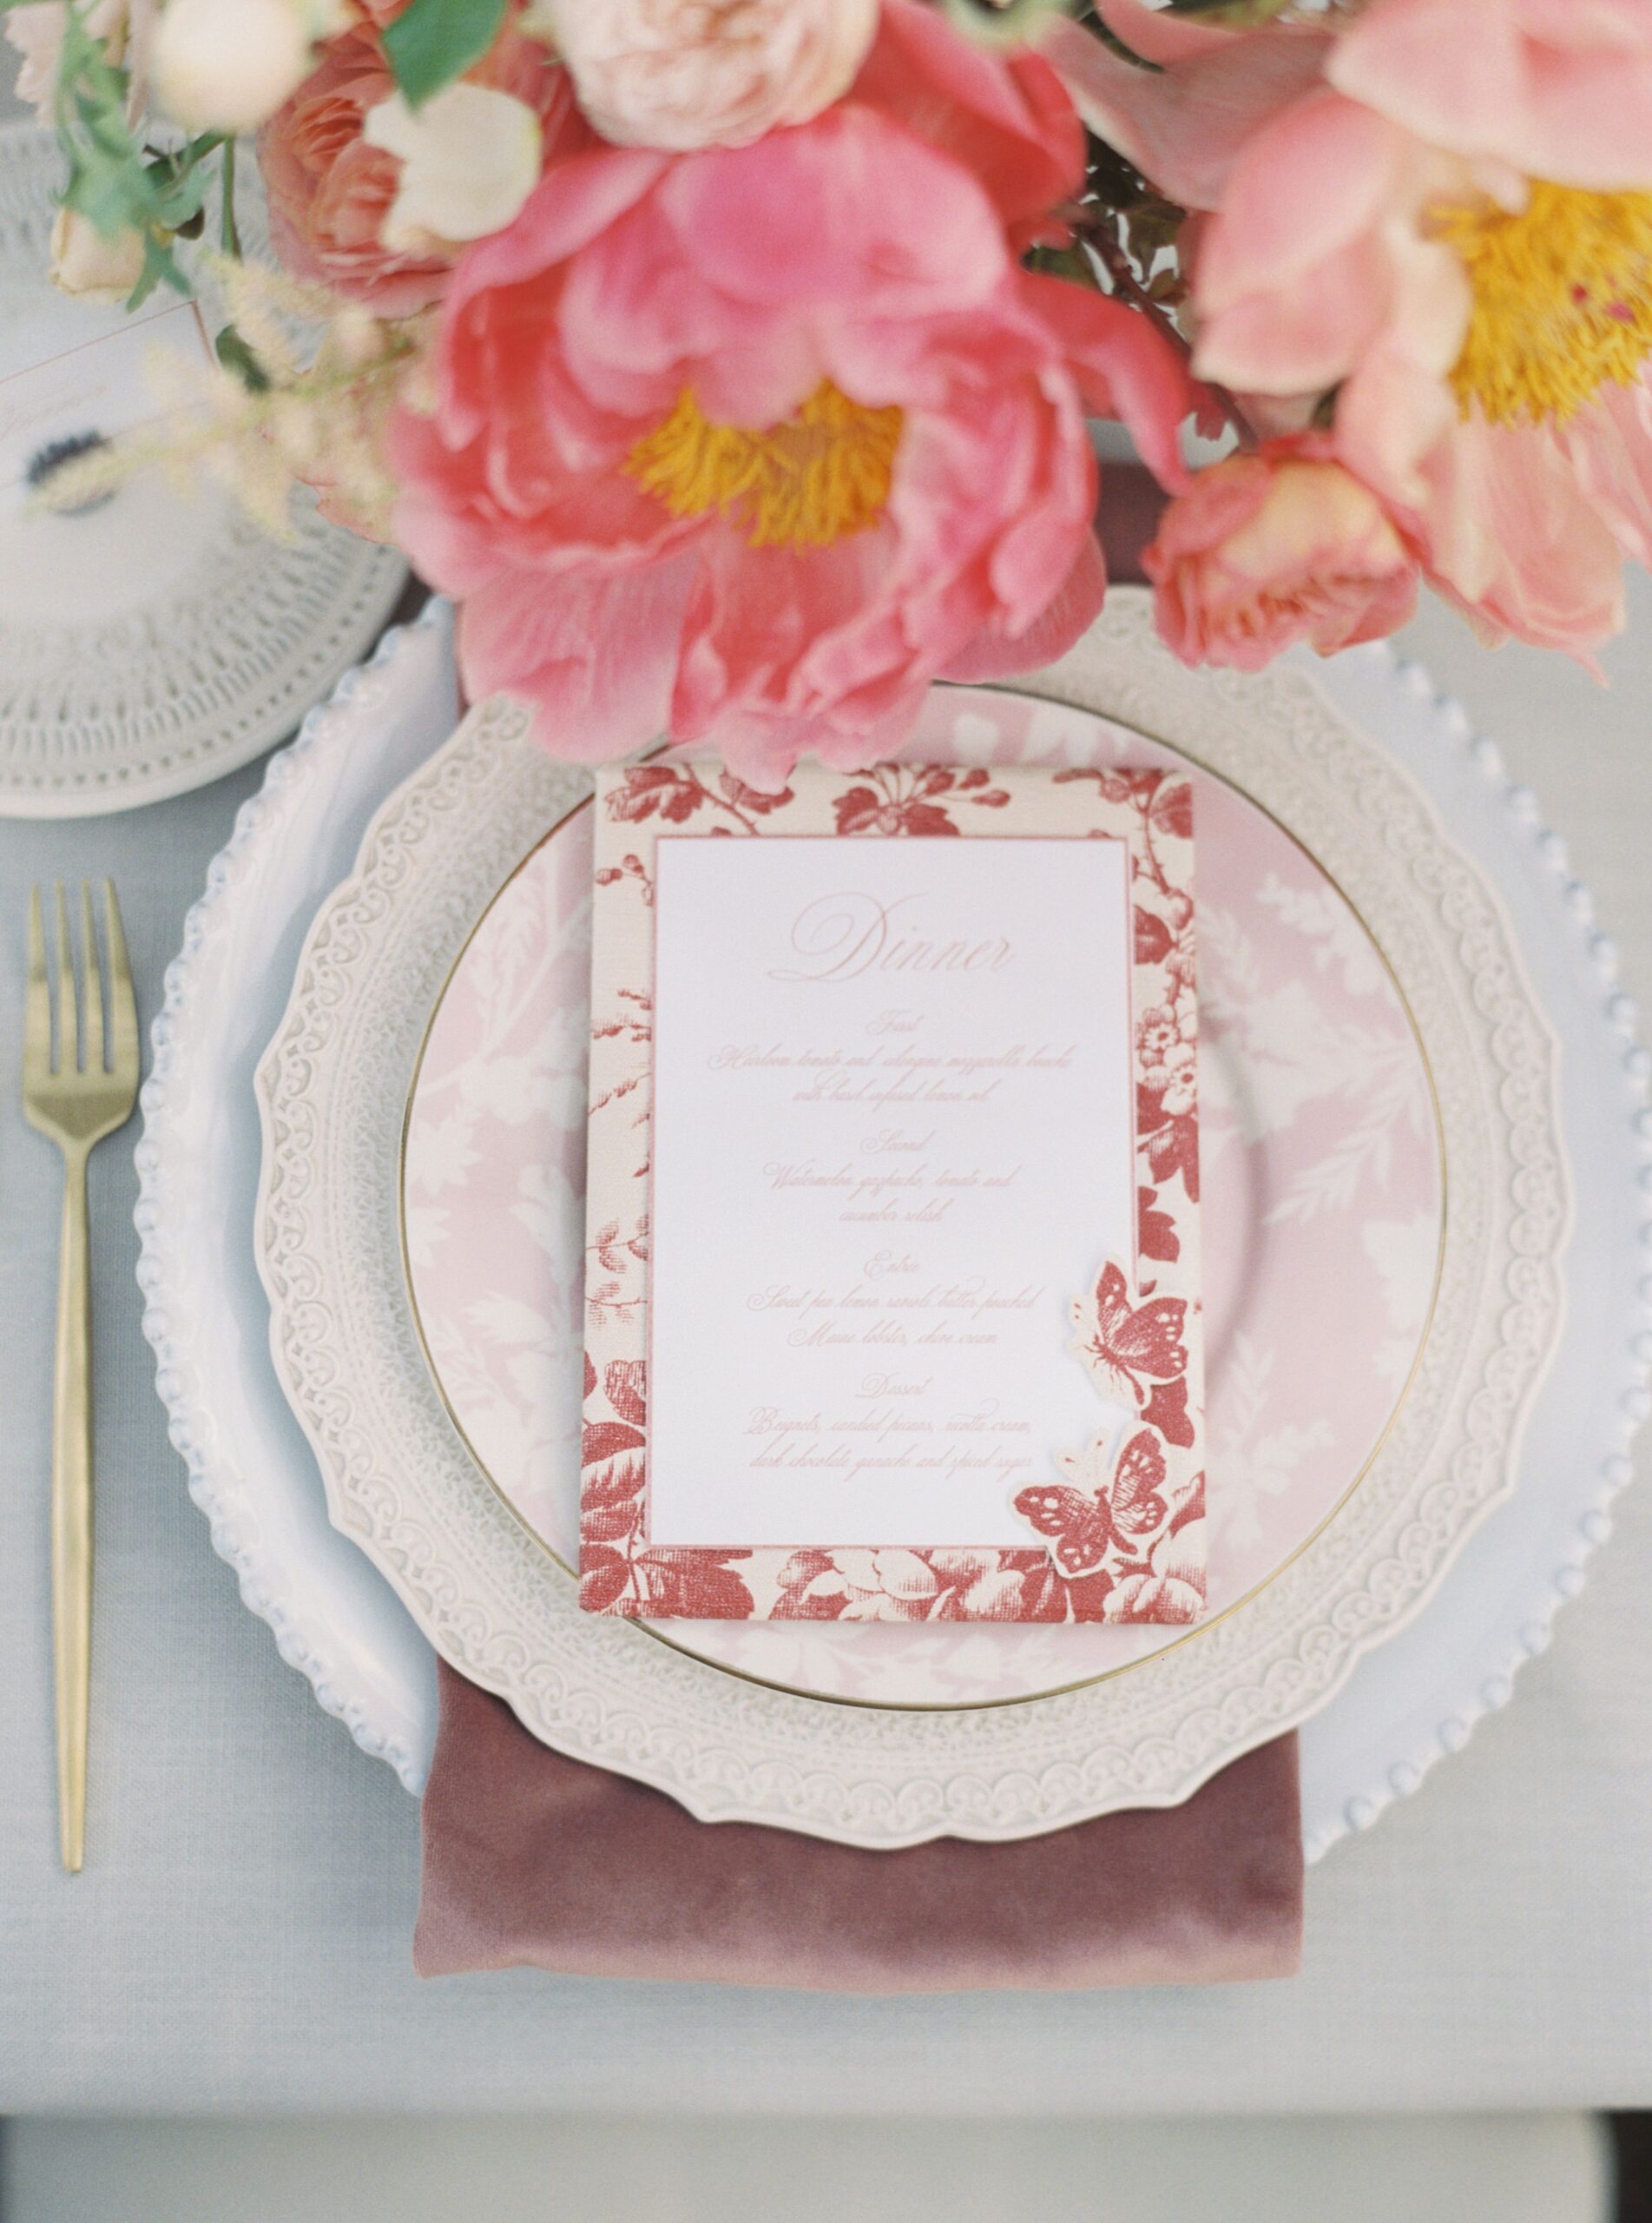 Beautiful outdoor tablescape for wedding with pink garden roses. Photographed on film by Chicago based destination wedding photographer Sarah Sunstrom Photography.